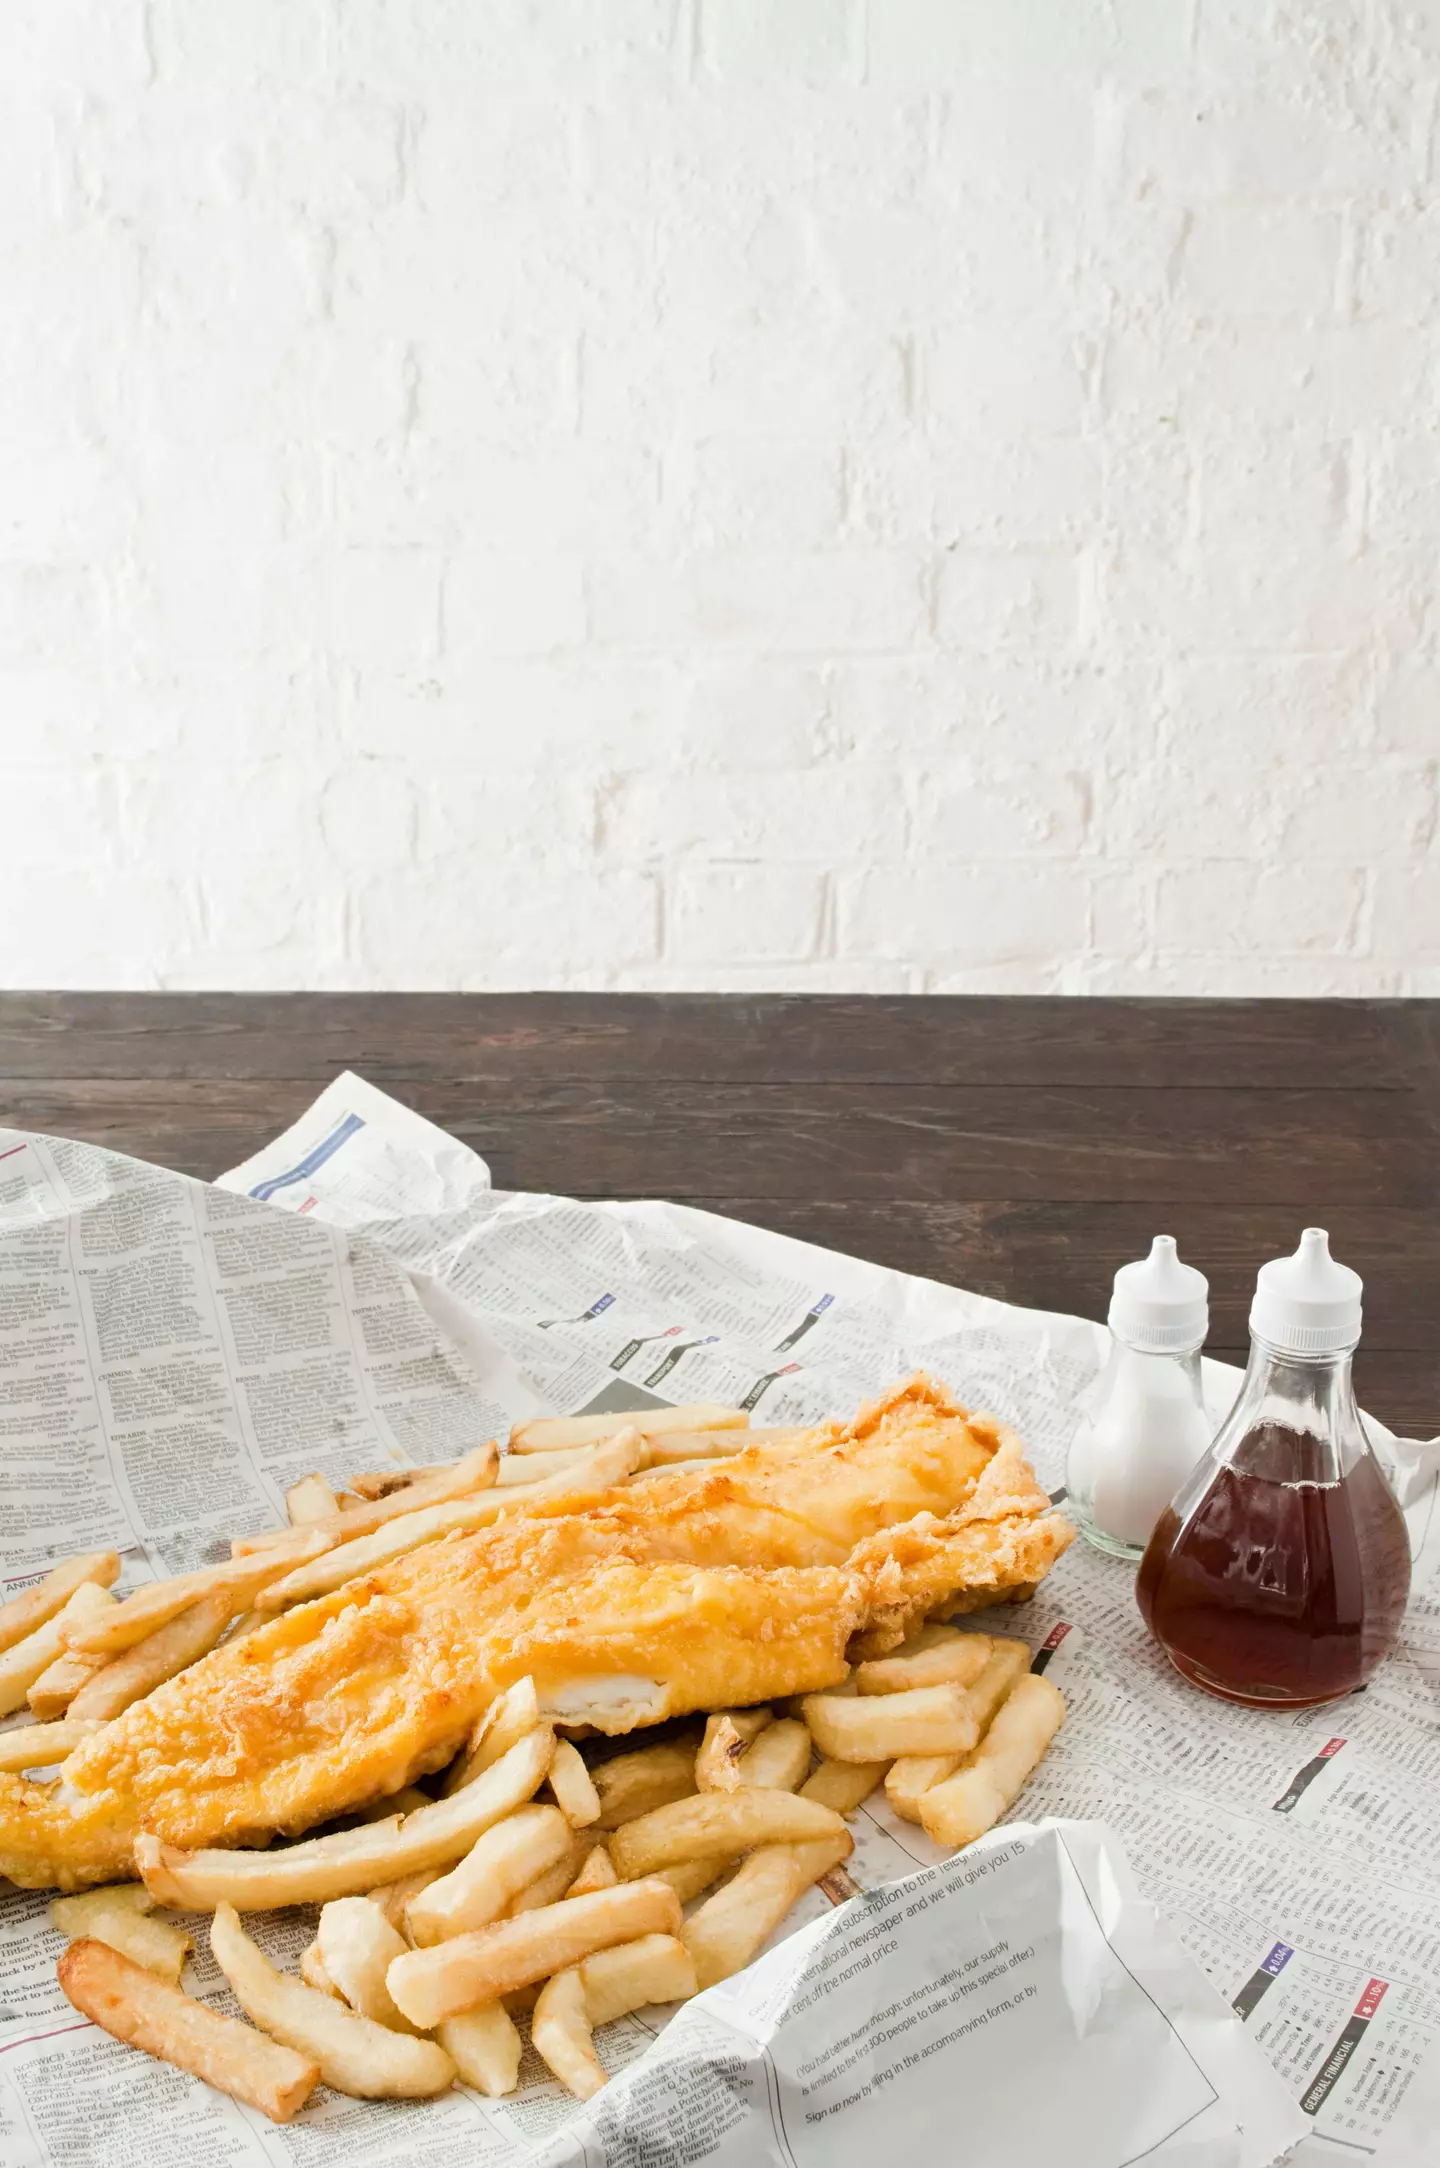 The vinegar sloshed all over your chips might not actually be vinegar.